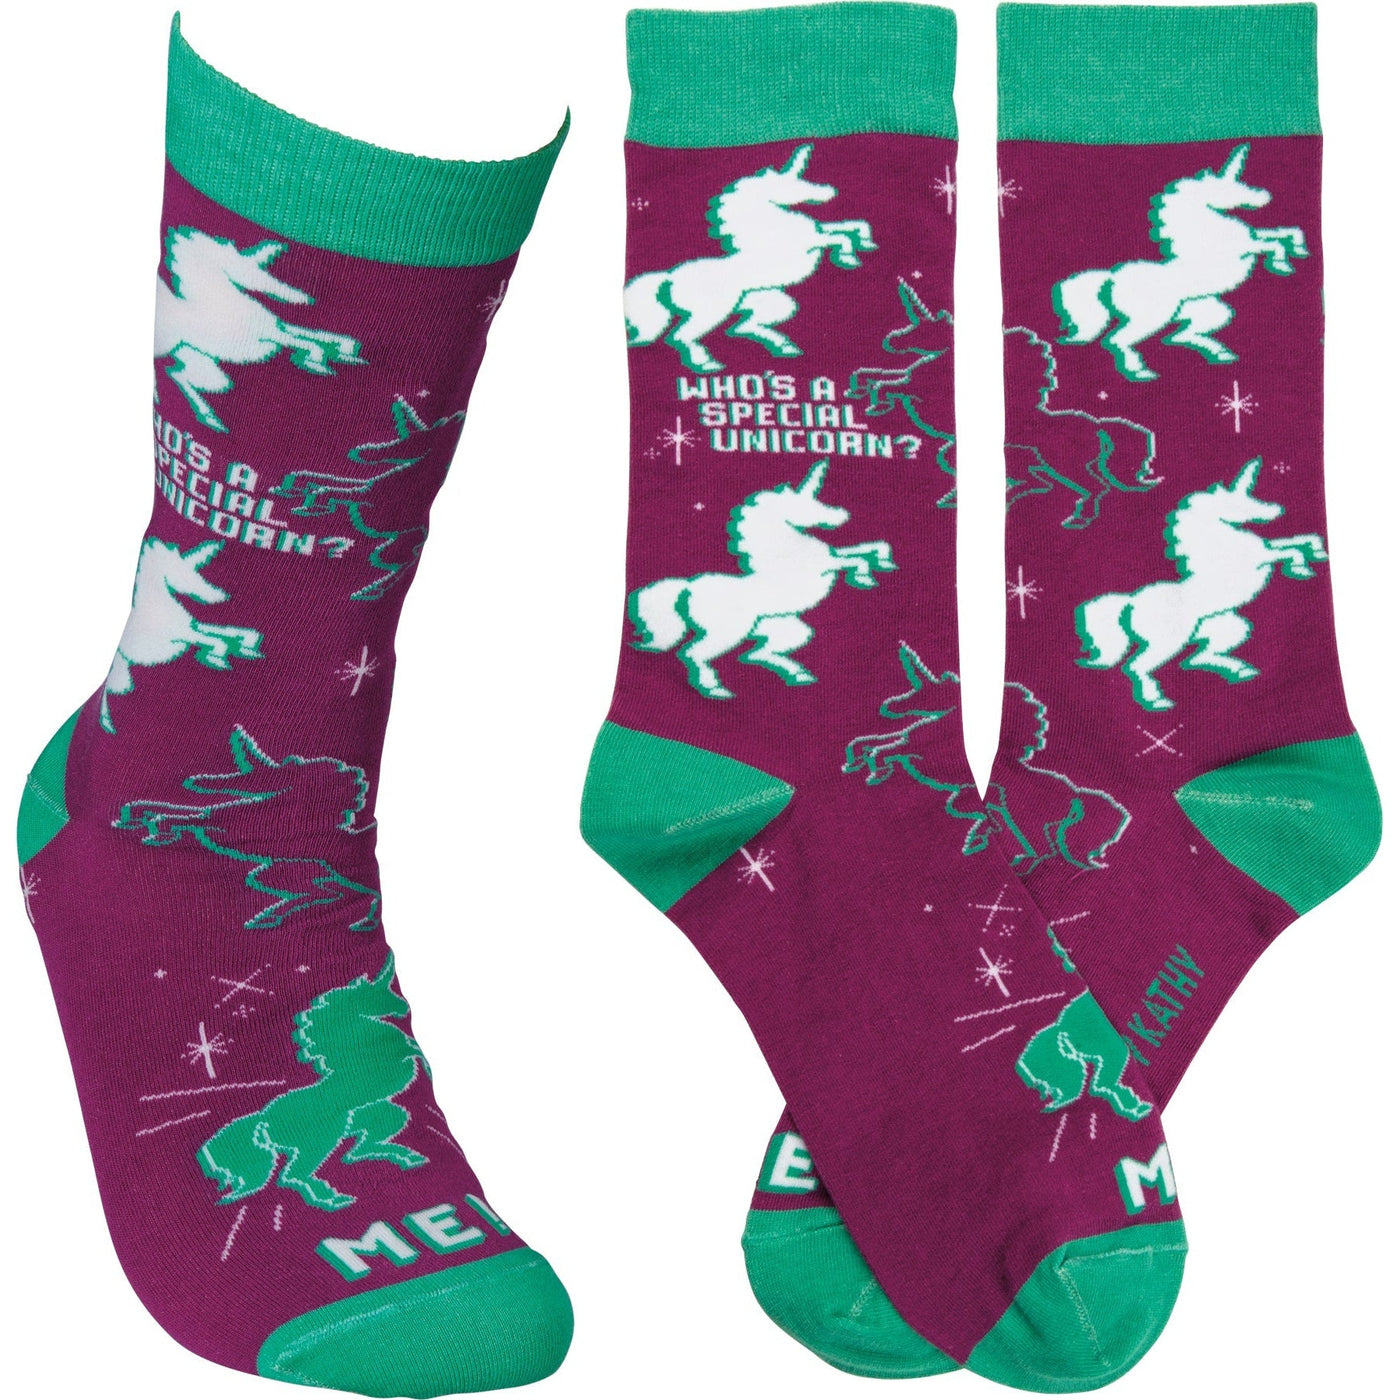 Who's A Special Unicorn? Me! Colorful Funny Novelty Socks with Cool Design, Bold/Crazy/Unique/Quirky Specialty Dress Socks by The Bullish Store